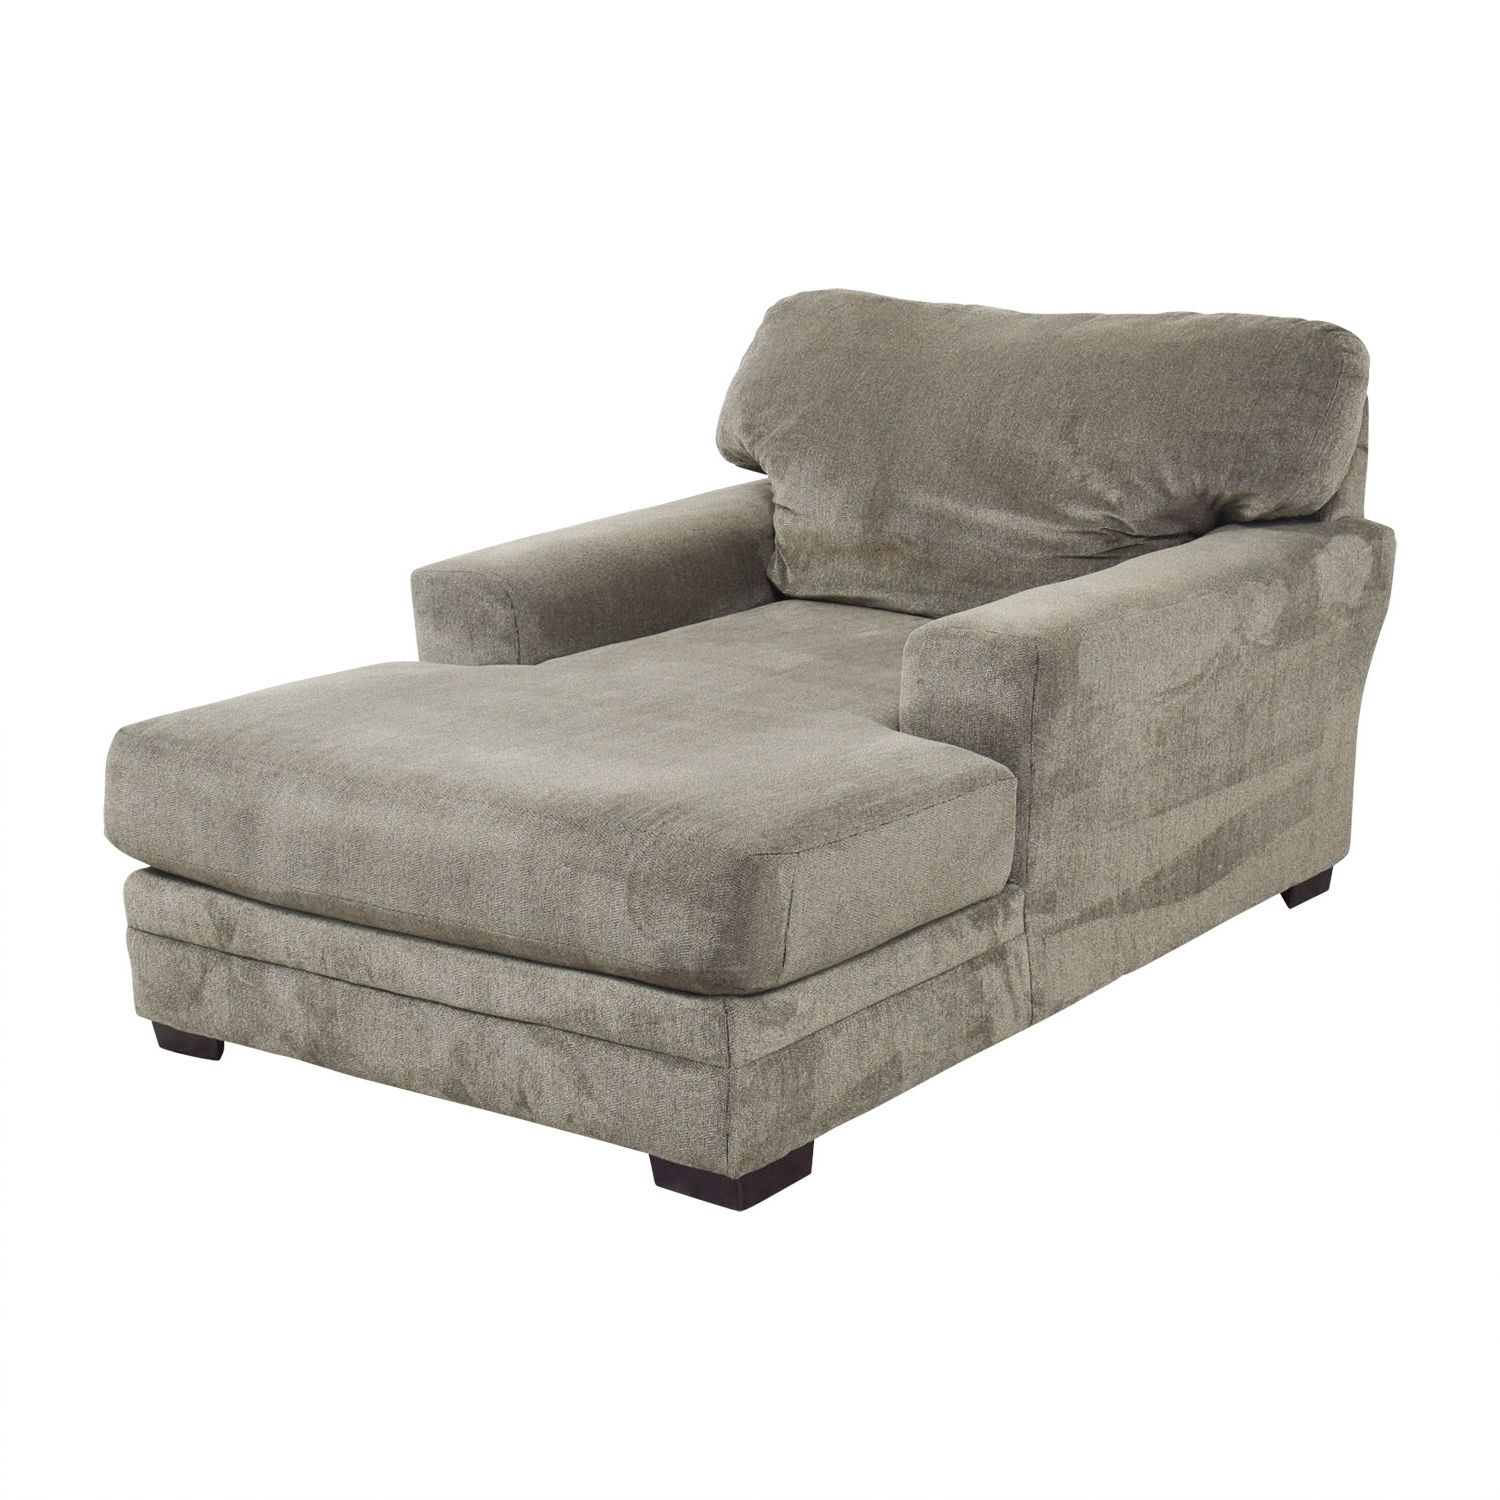 [%81% Off – Bob's Furniture Bob's Furniture Grey Chaise Lounge / Sofas Pertaining To Recent Grey Chaises|Grey Chaises Within 2018 81% Off – Bob's Furniture Bob's Furniture Grey Chaise Lounge / Sofas|Latest Grey Chaises For 81% Off – Bob's Furniture Bob's Furniture Grey Chaise Lounge / Sofas|Most Up To Date 81% Off – Bob's Furniture Bob's Furniture Grey Chaise Lounge / Sofas With Grey Chaises%] (View 1 of 15)